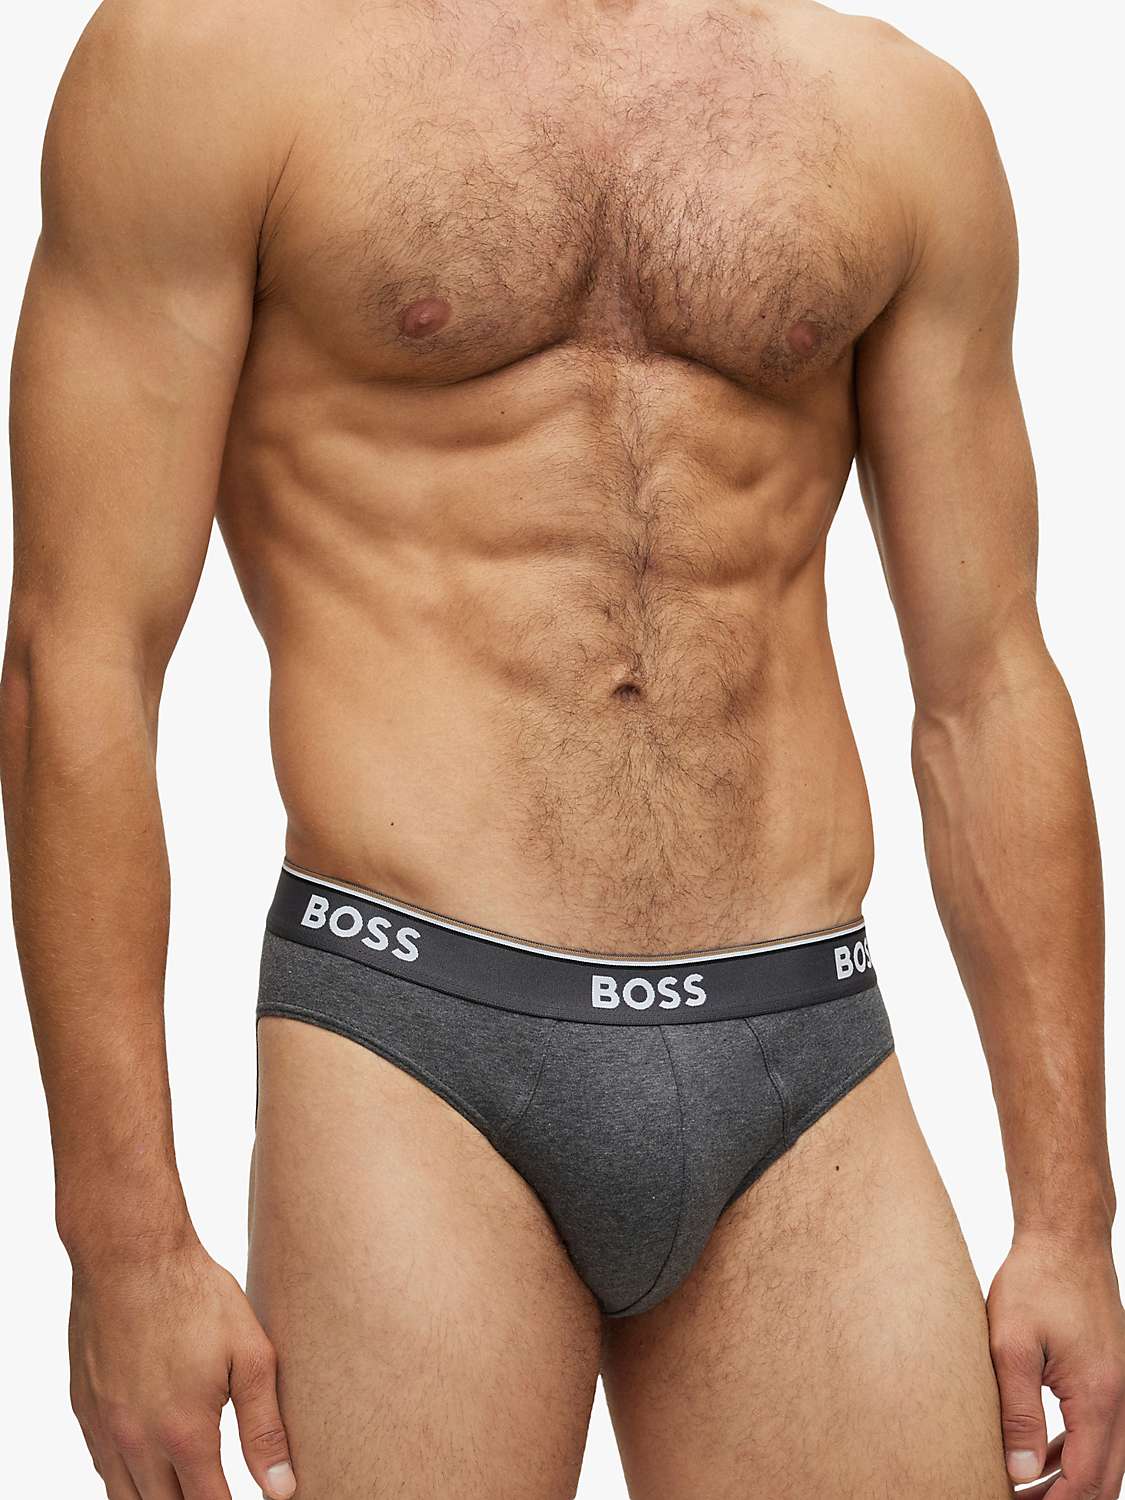 Buy BOSS Stretch Power Briefs, Pack of 3, Open Grey Online at johnlewis.com